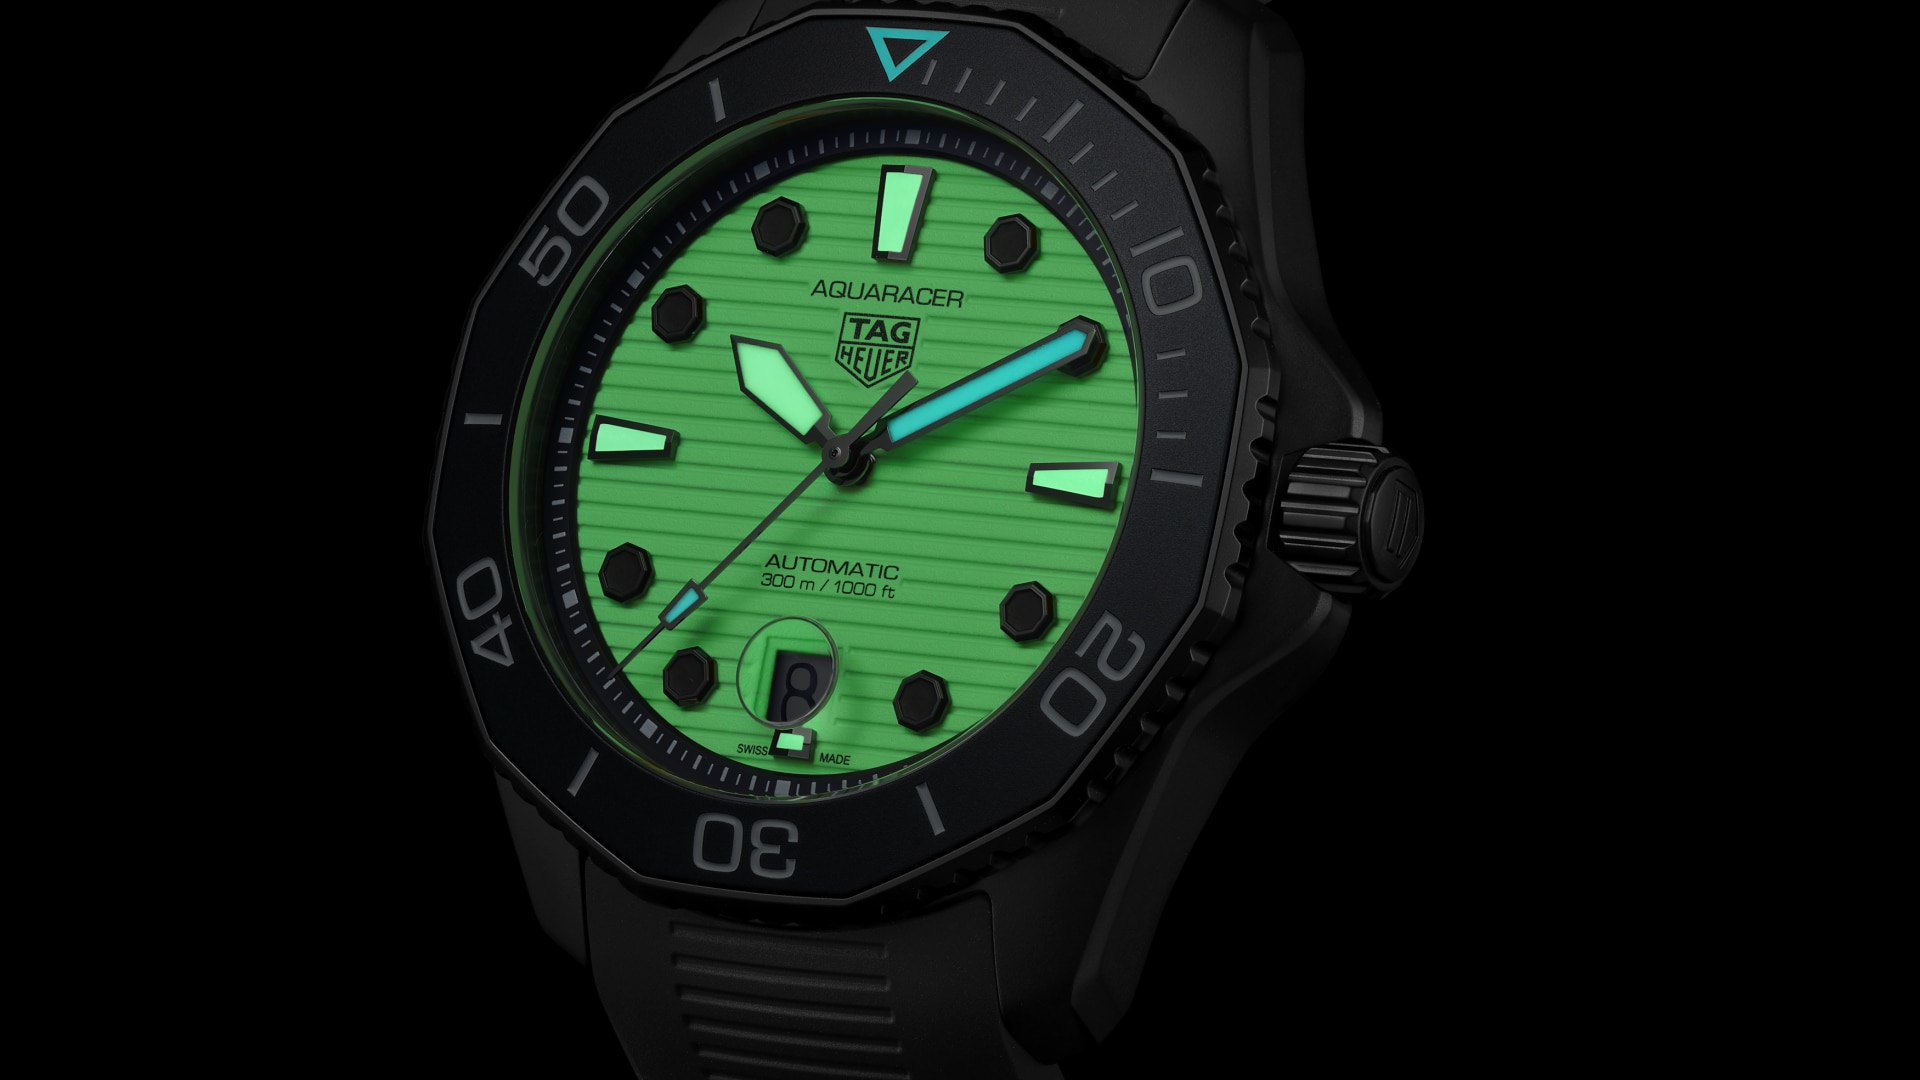 The Bamford x TAG Heuer Aquaracer wants to be your 'go anywhere